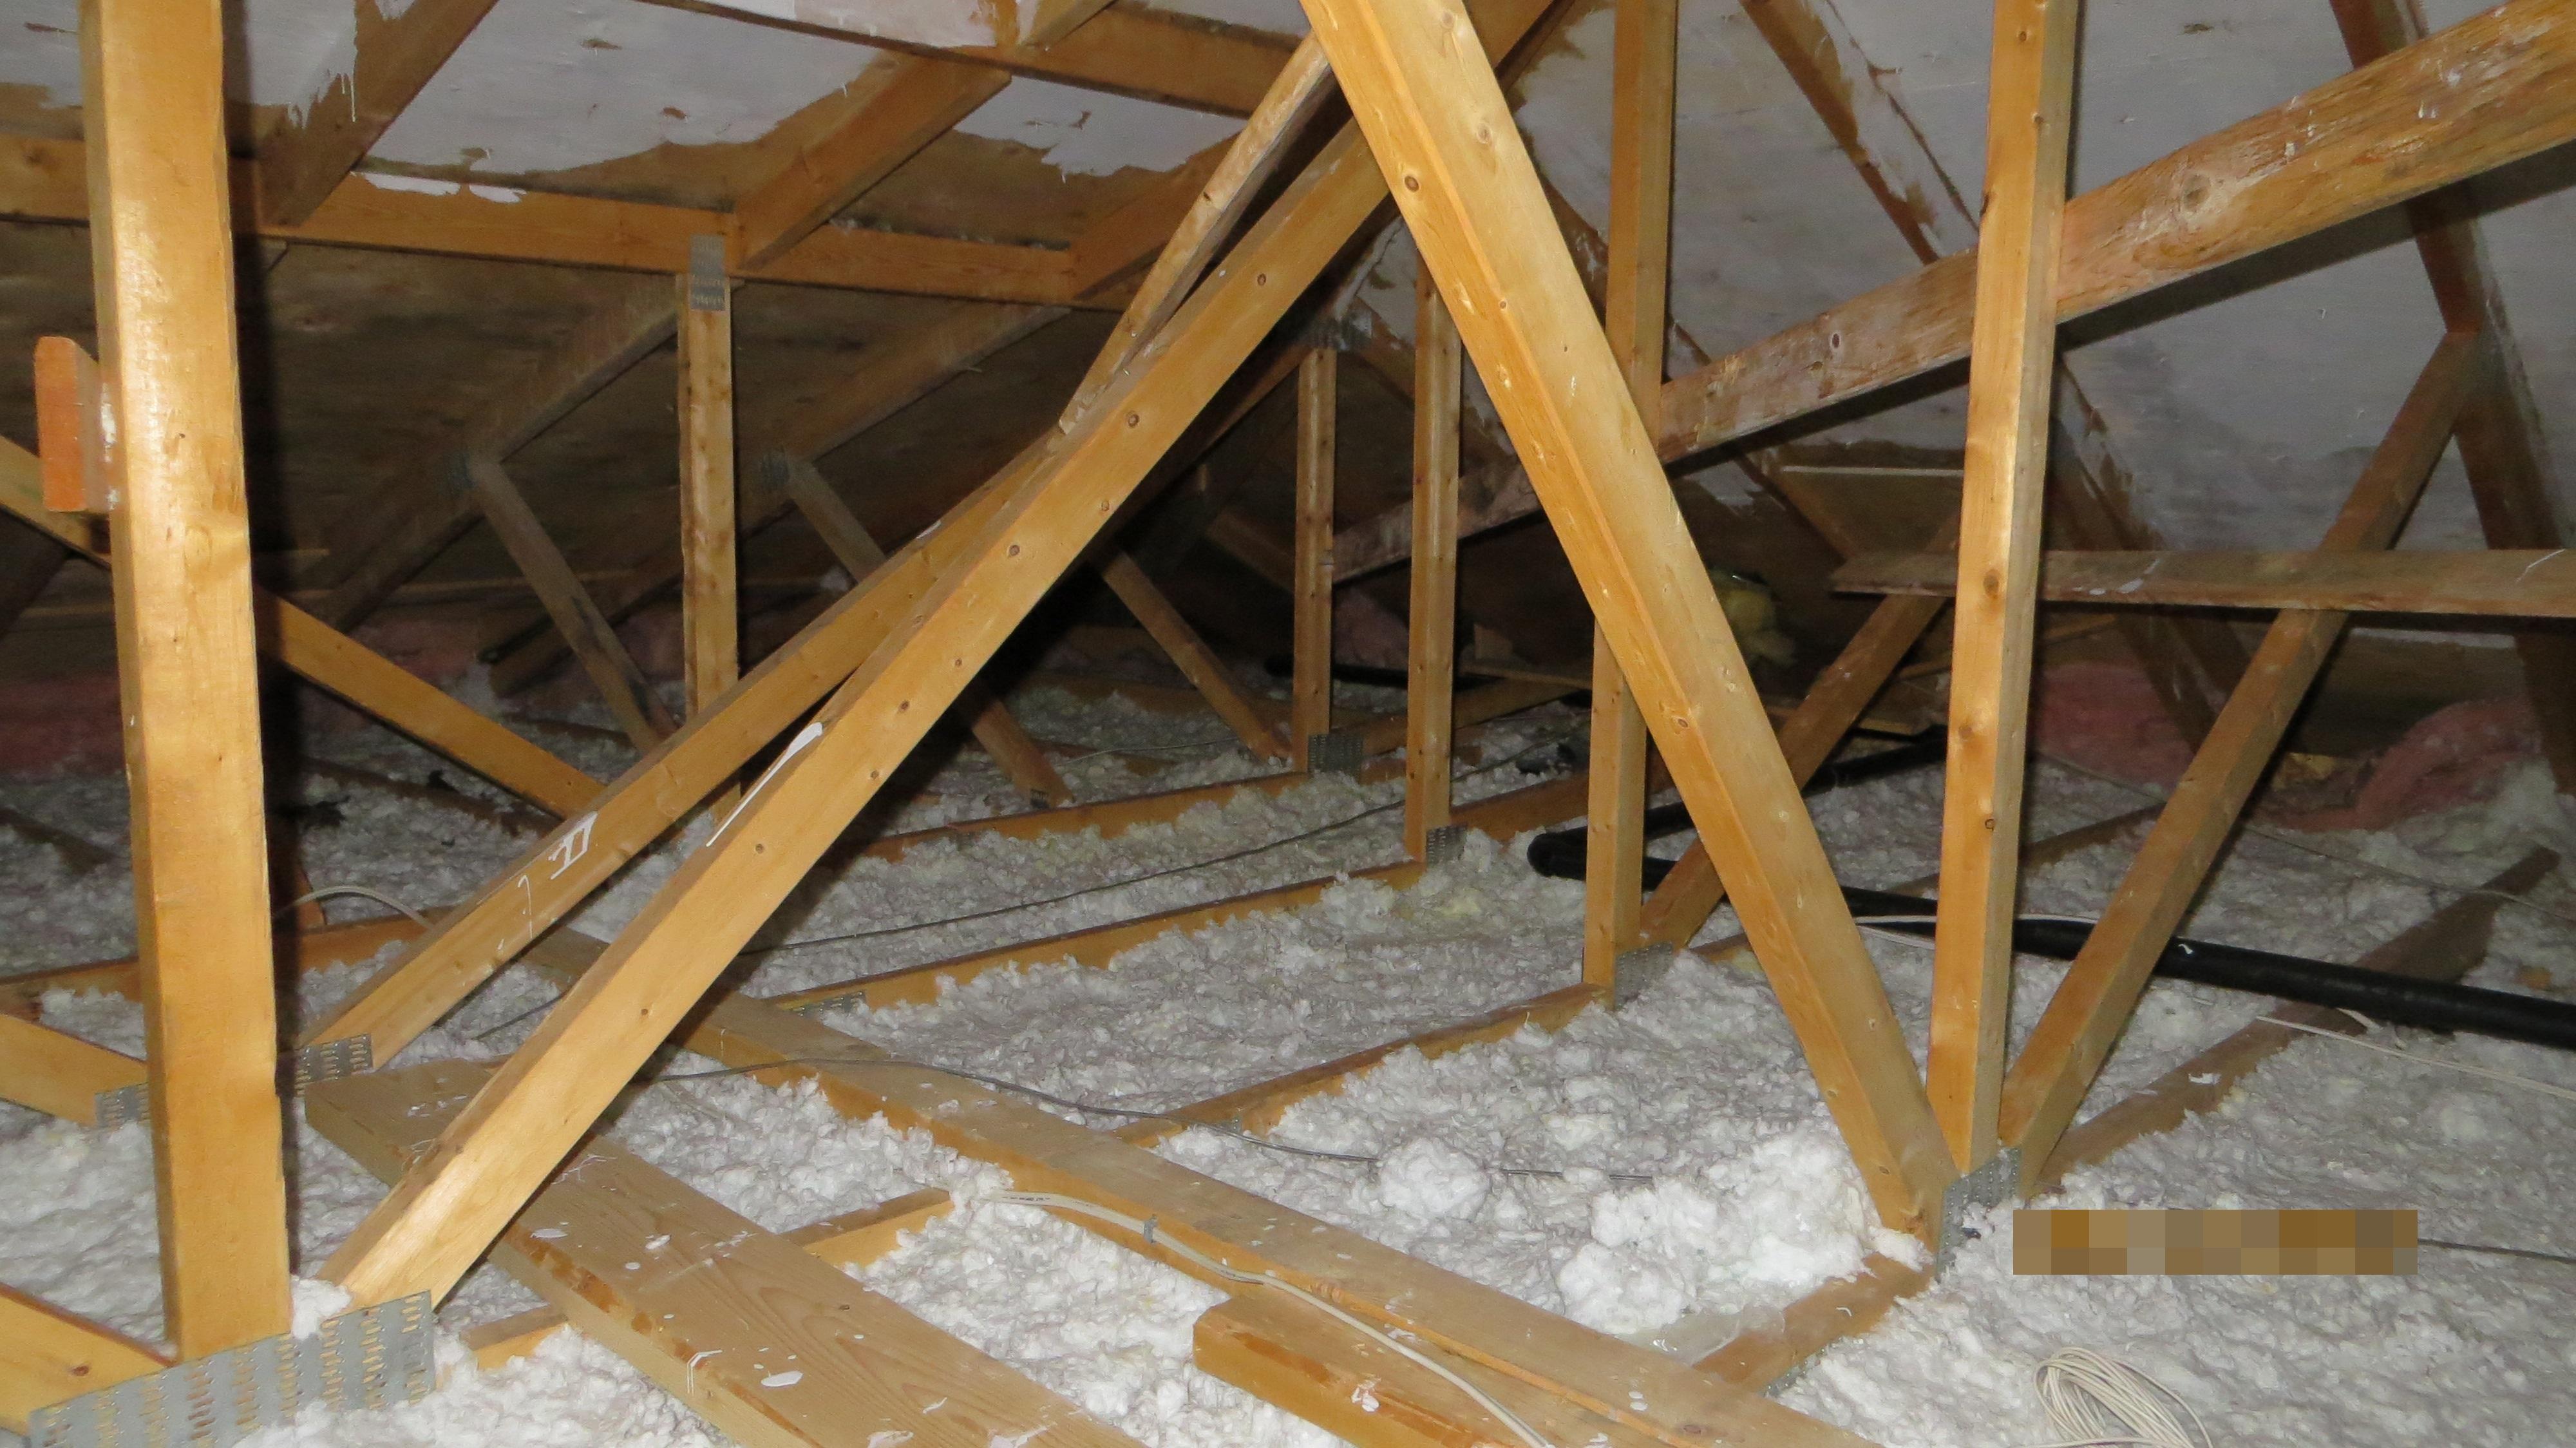 Very low graded insulation in Attic